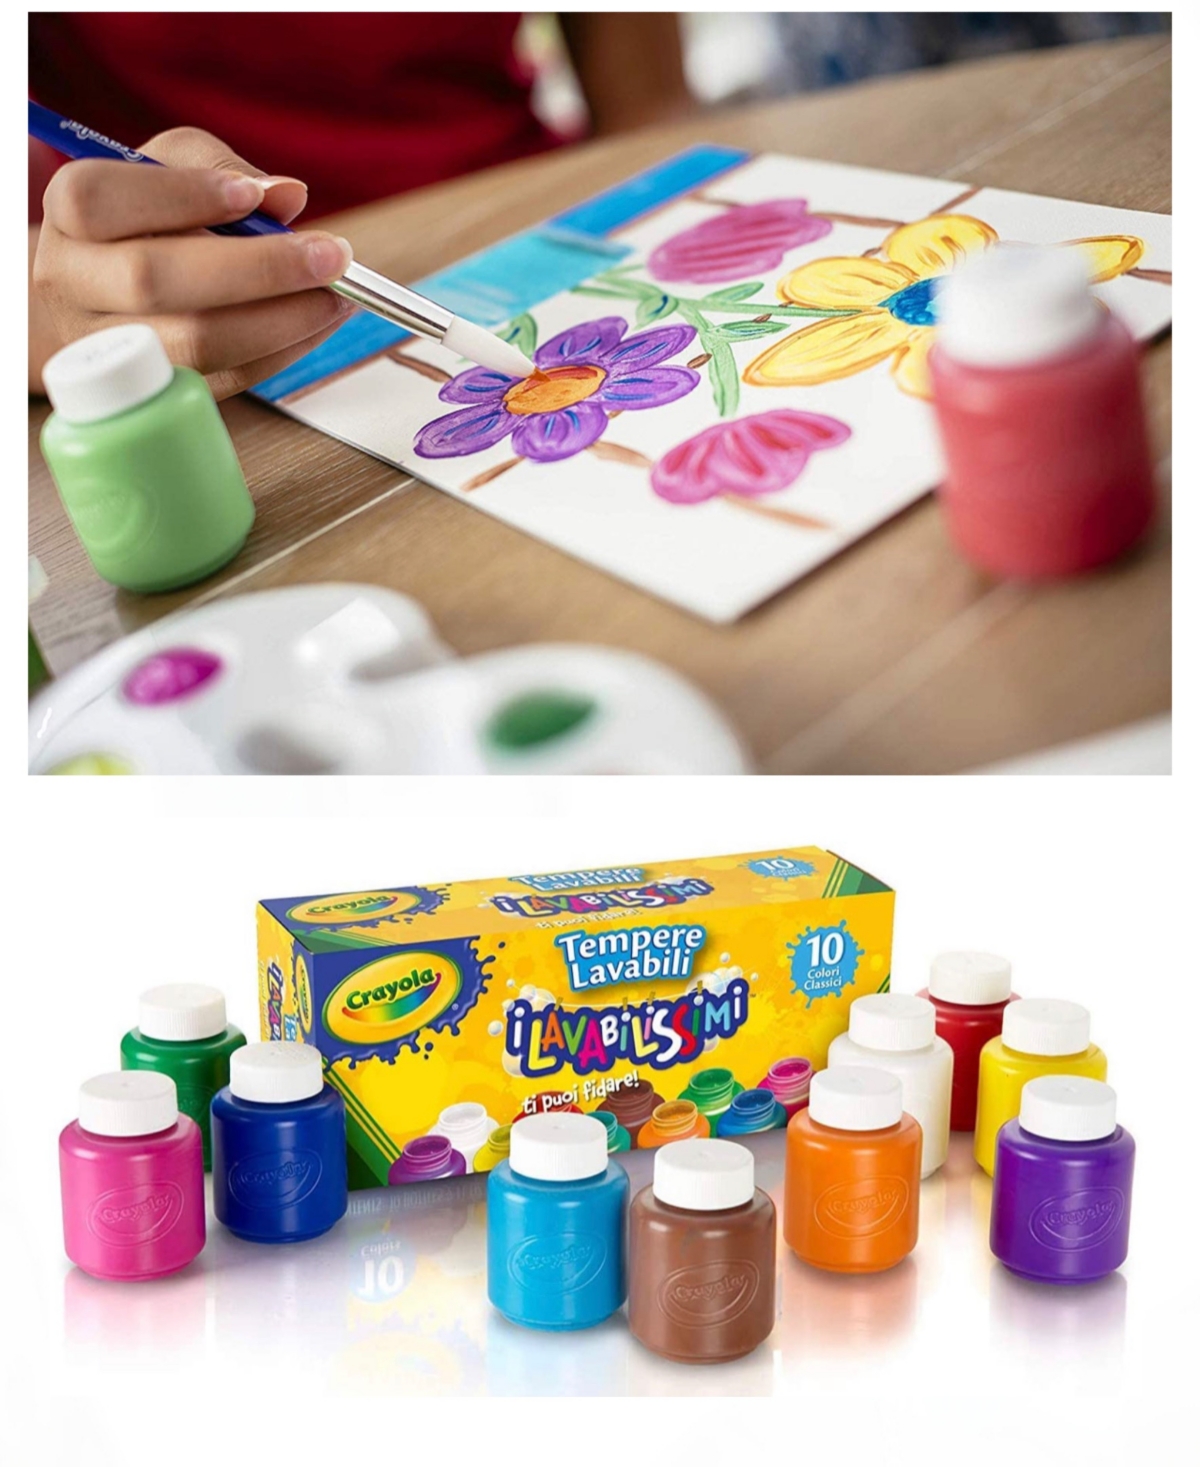 Crayola- Keep Me Clean- Washable Paint Bottles - Multi Colored